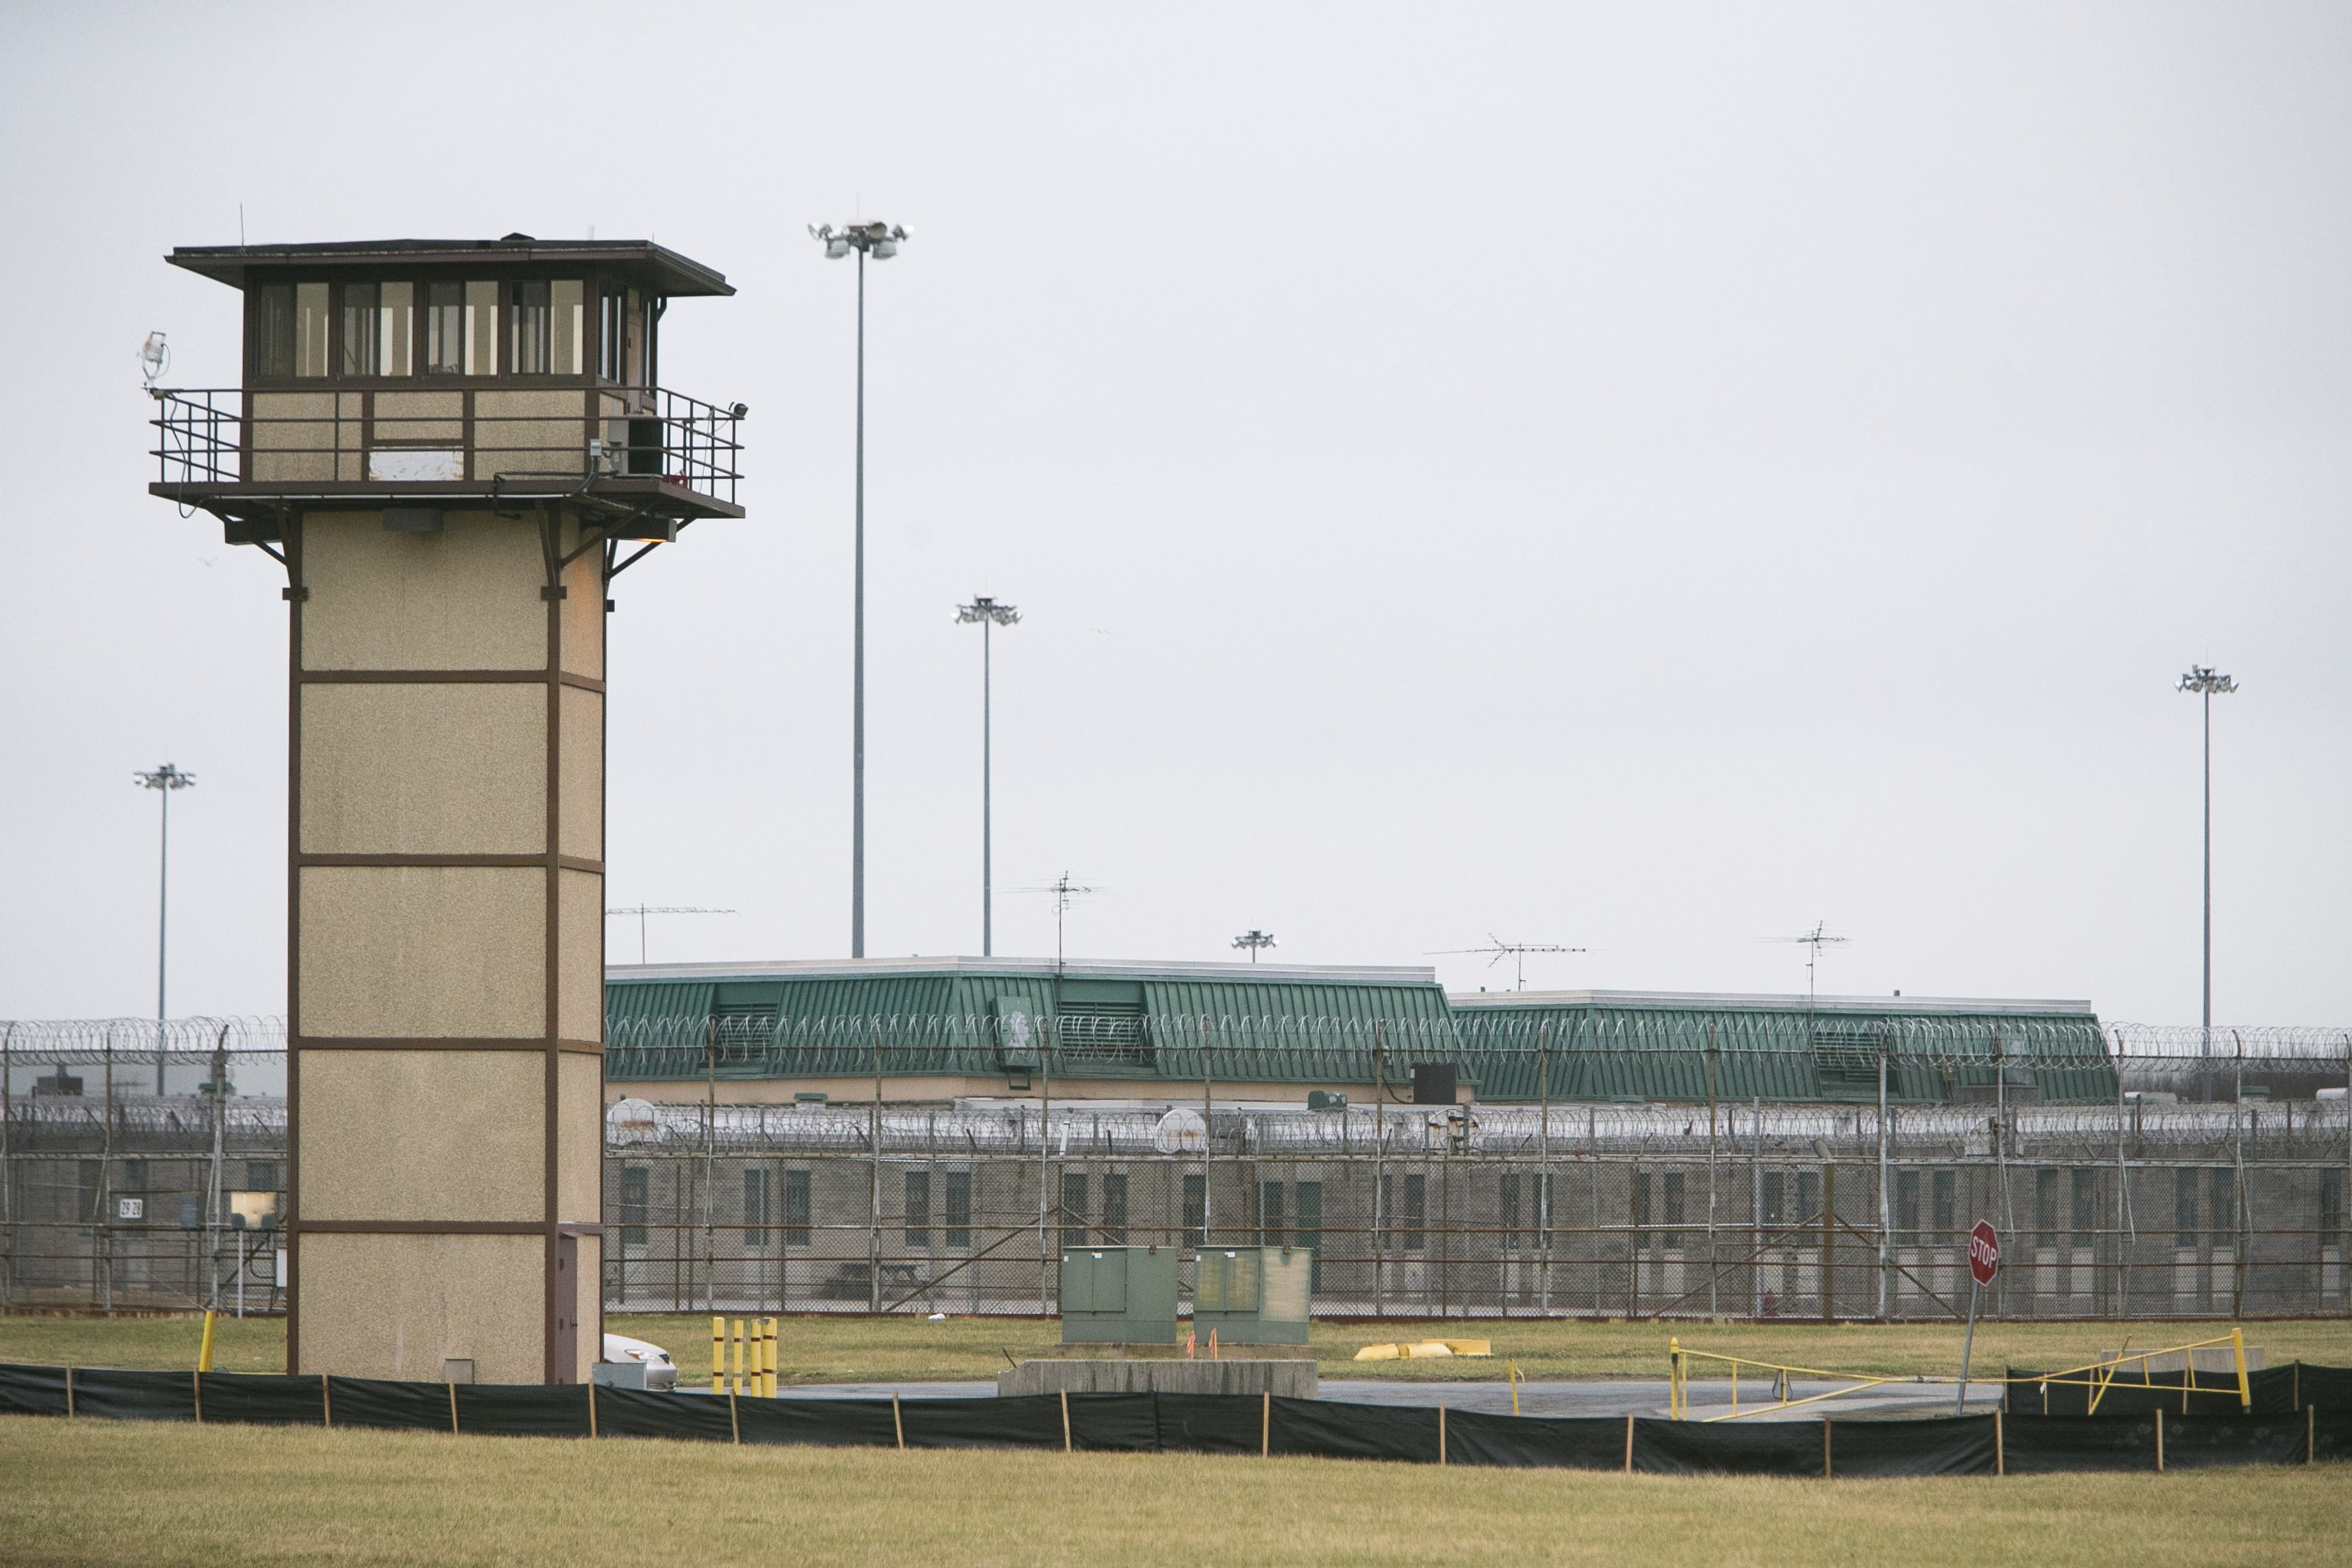 FILE - In this Feb. 1, 2017 file photo, Vaughn Correctional Center near Smyrna, Del., remains on lockdown following a disturbance. State officials are hiring independent experts to review inmate access to health care and the prisoner grievance system in the wake of the deadly inmate riot and hostage taking last year at Delaware's maximum-security prison.